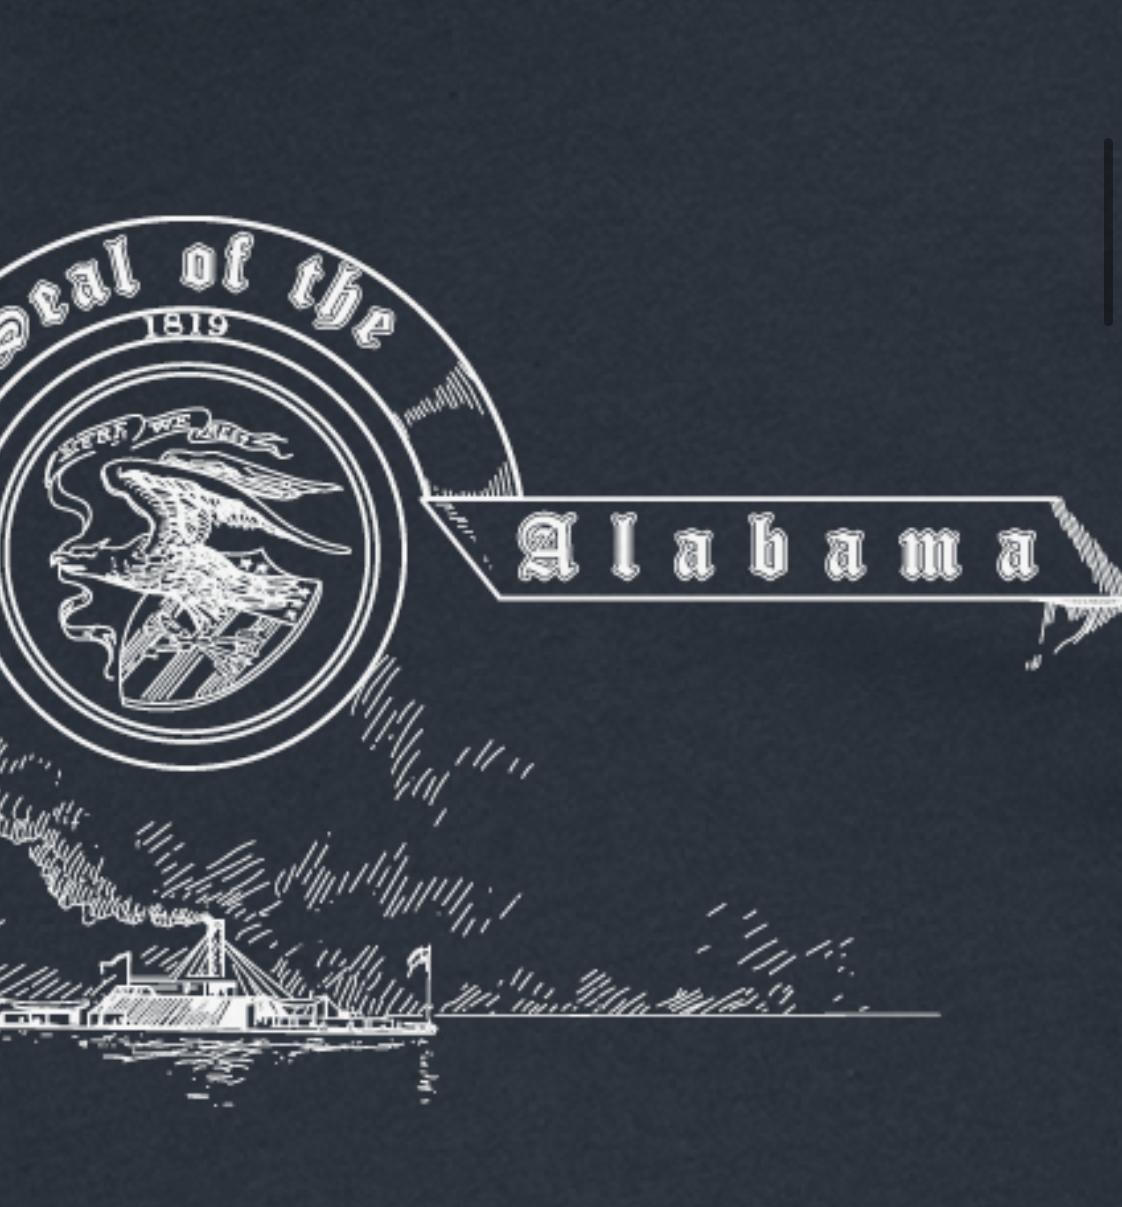 Alabama State Seal and Battle. of Mobile Bay Shirt